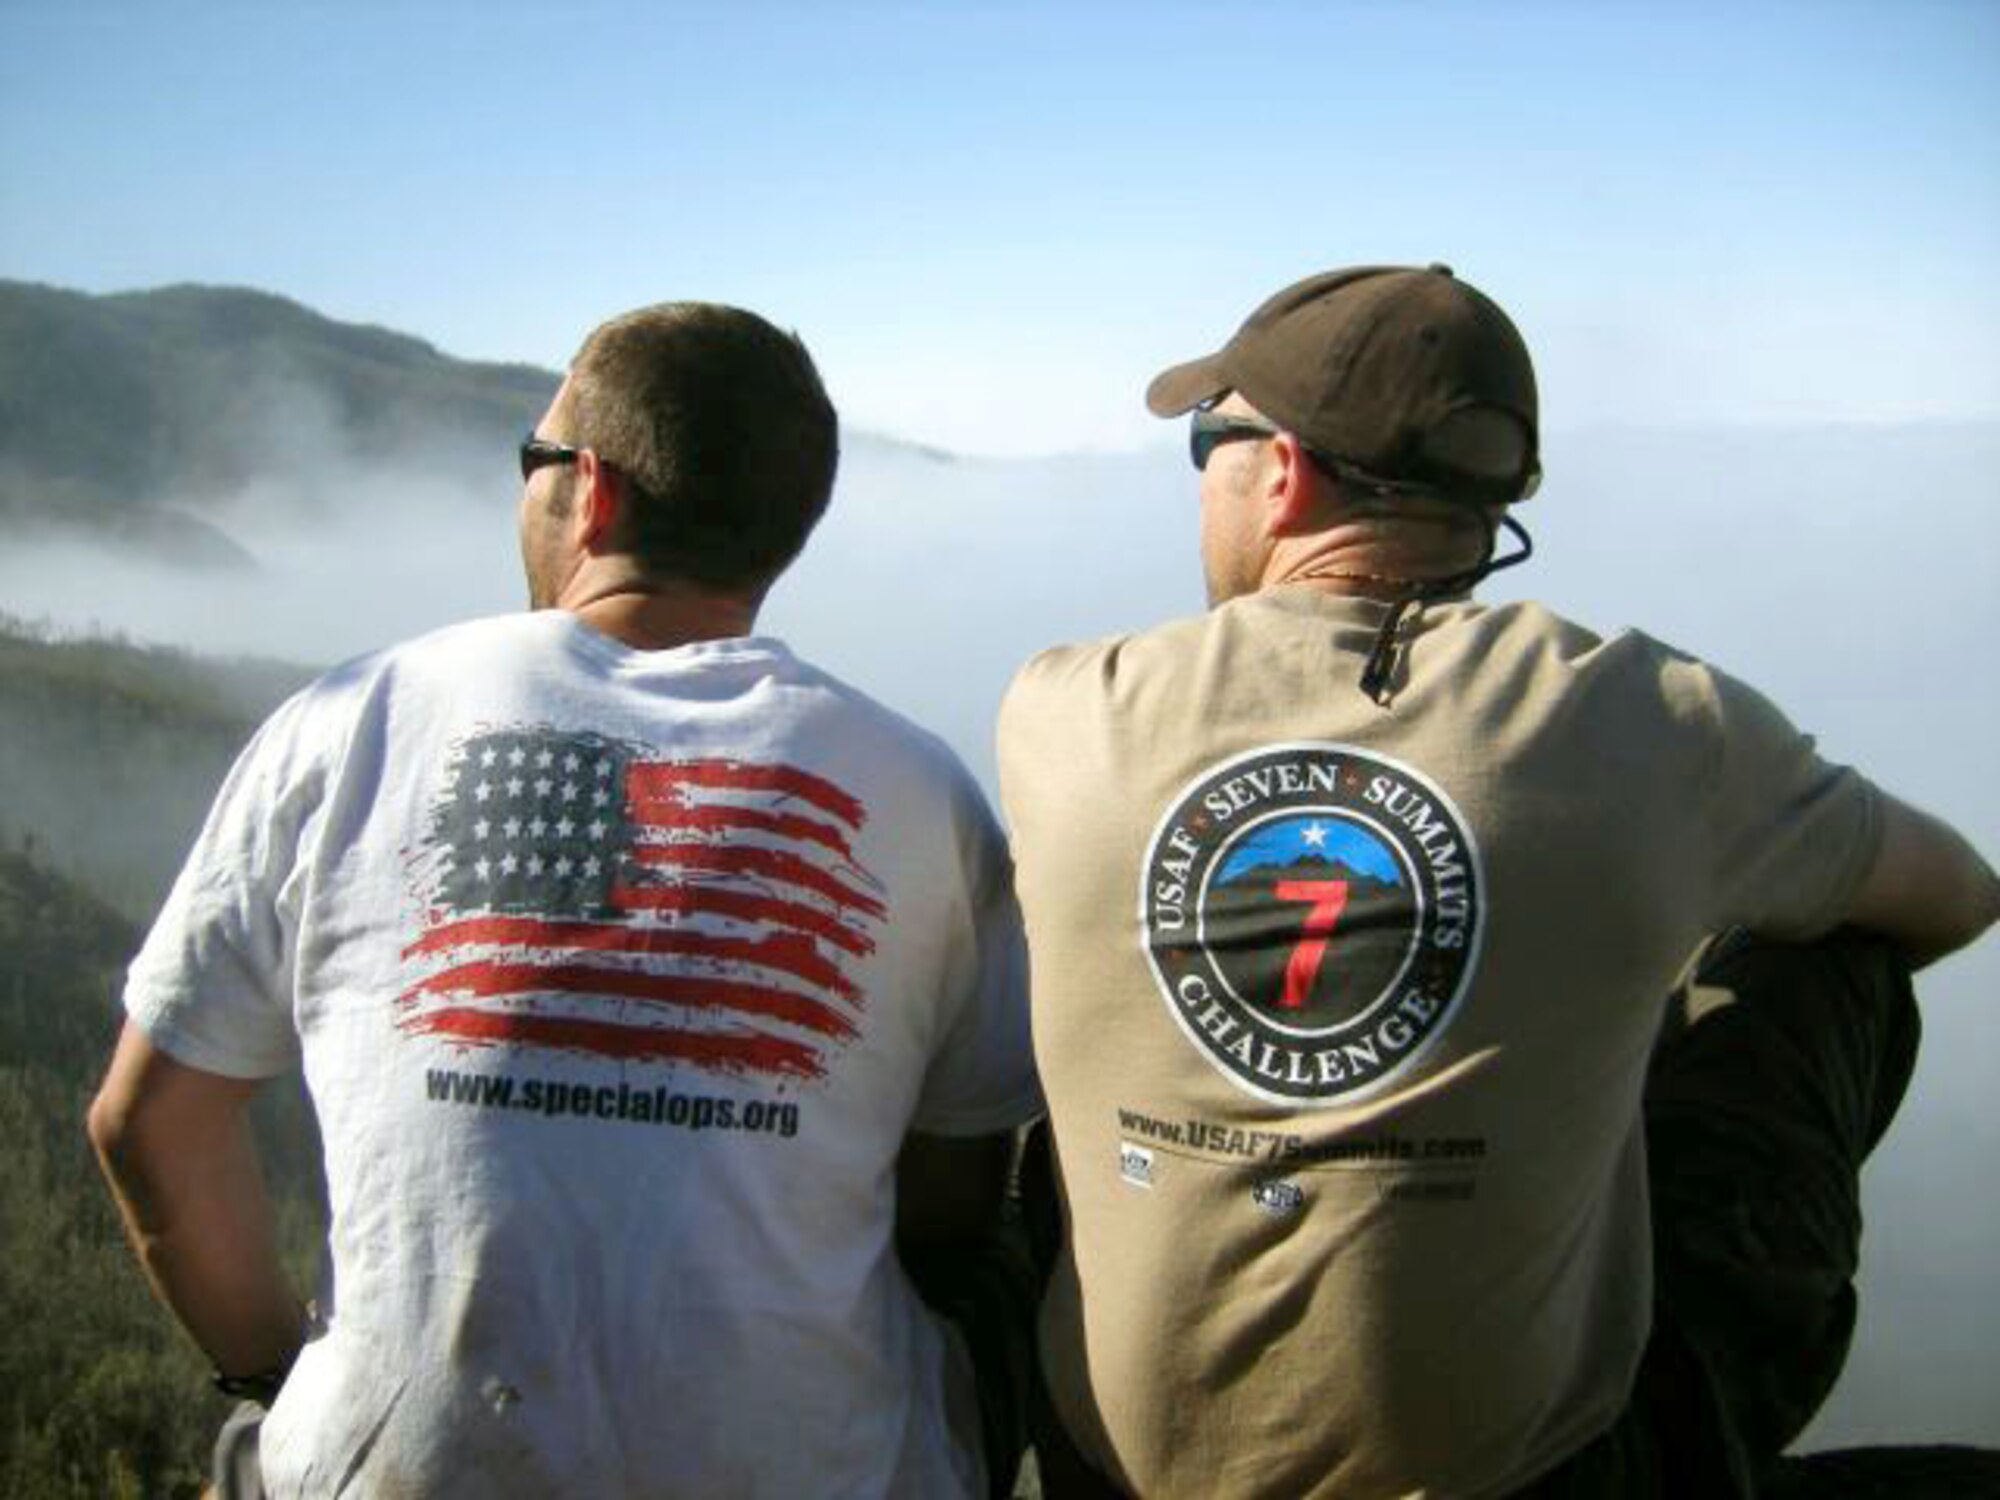 1st Lt. Mark Uberuaga (left) and Capt. Rob Marshall gaze upwards toward the summit of Mount Kilimanjaro during a break on Day 2 of their ascent. Lieutenant Uberuaga wears the Special Operations organization T-shirt, and Captain Marshall wears the T-shirt he designed for the Seven Summits Challenge. The men gave T-shirts to their climbing guides. (Courtesy photo/Capt. Nichelle Brokering) 